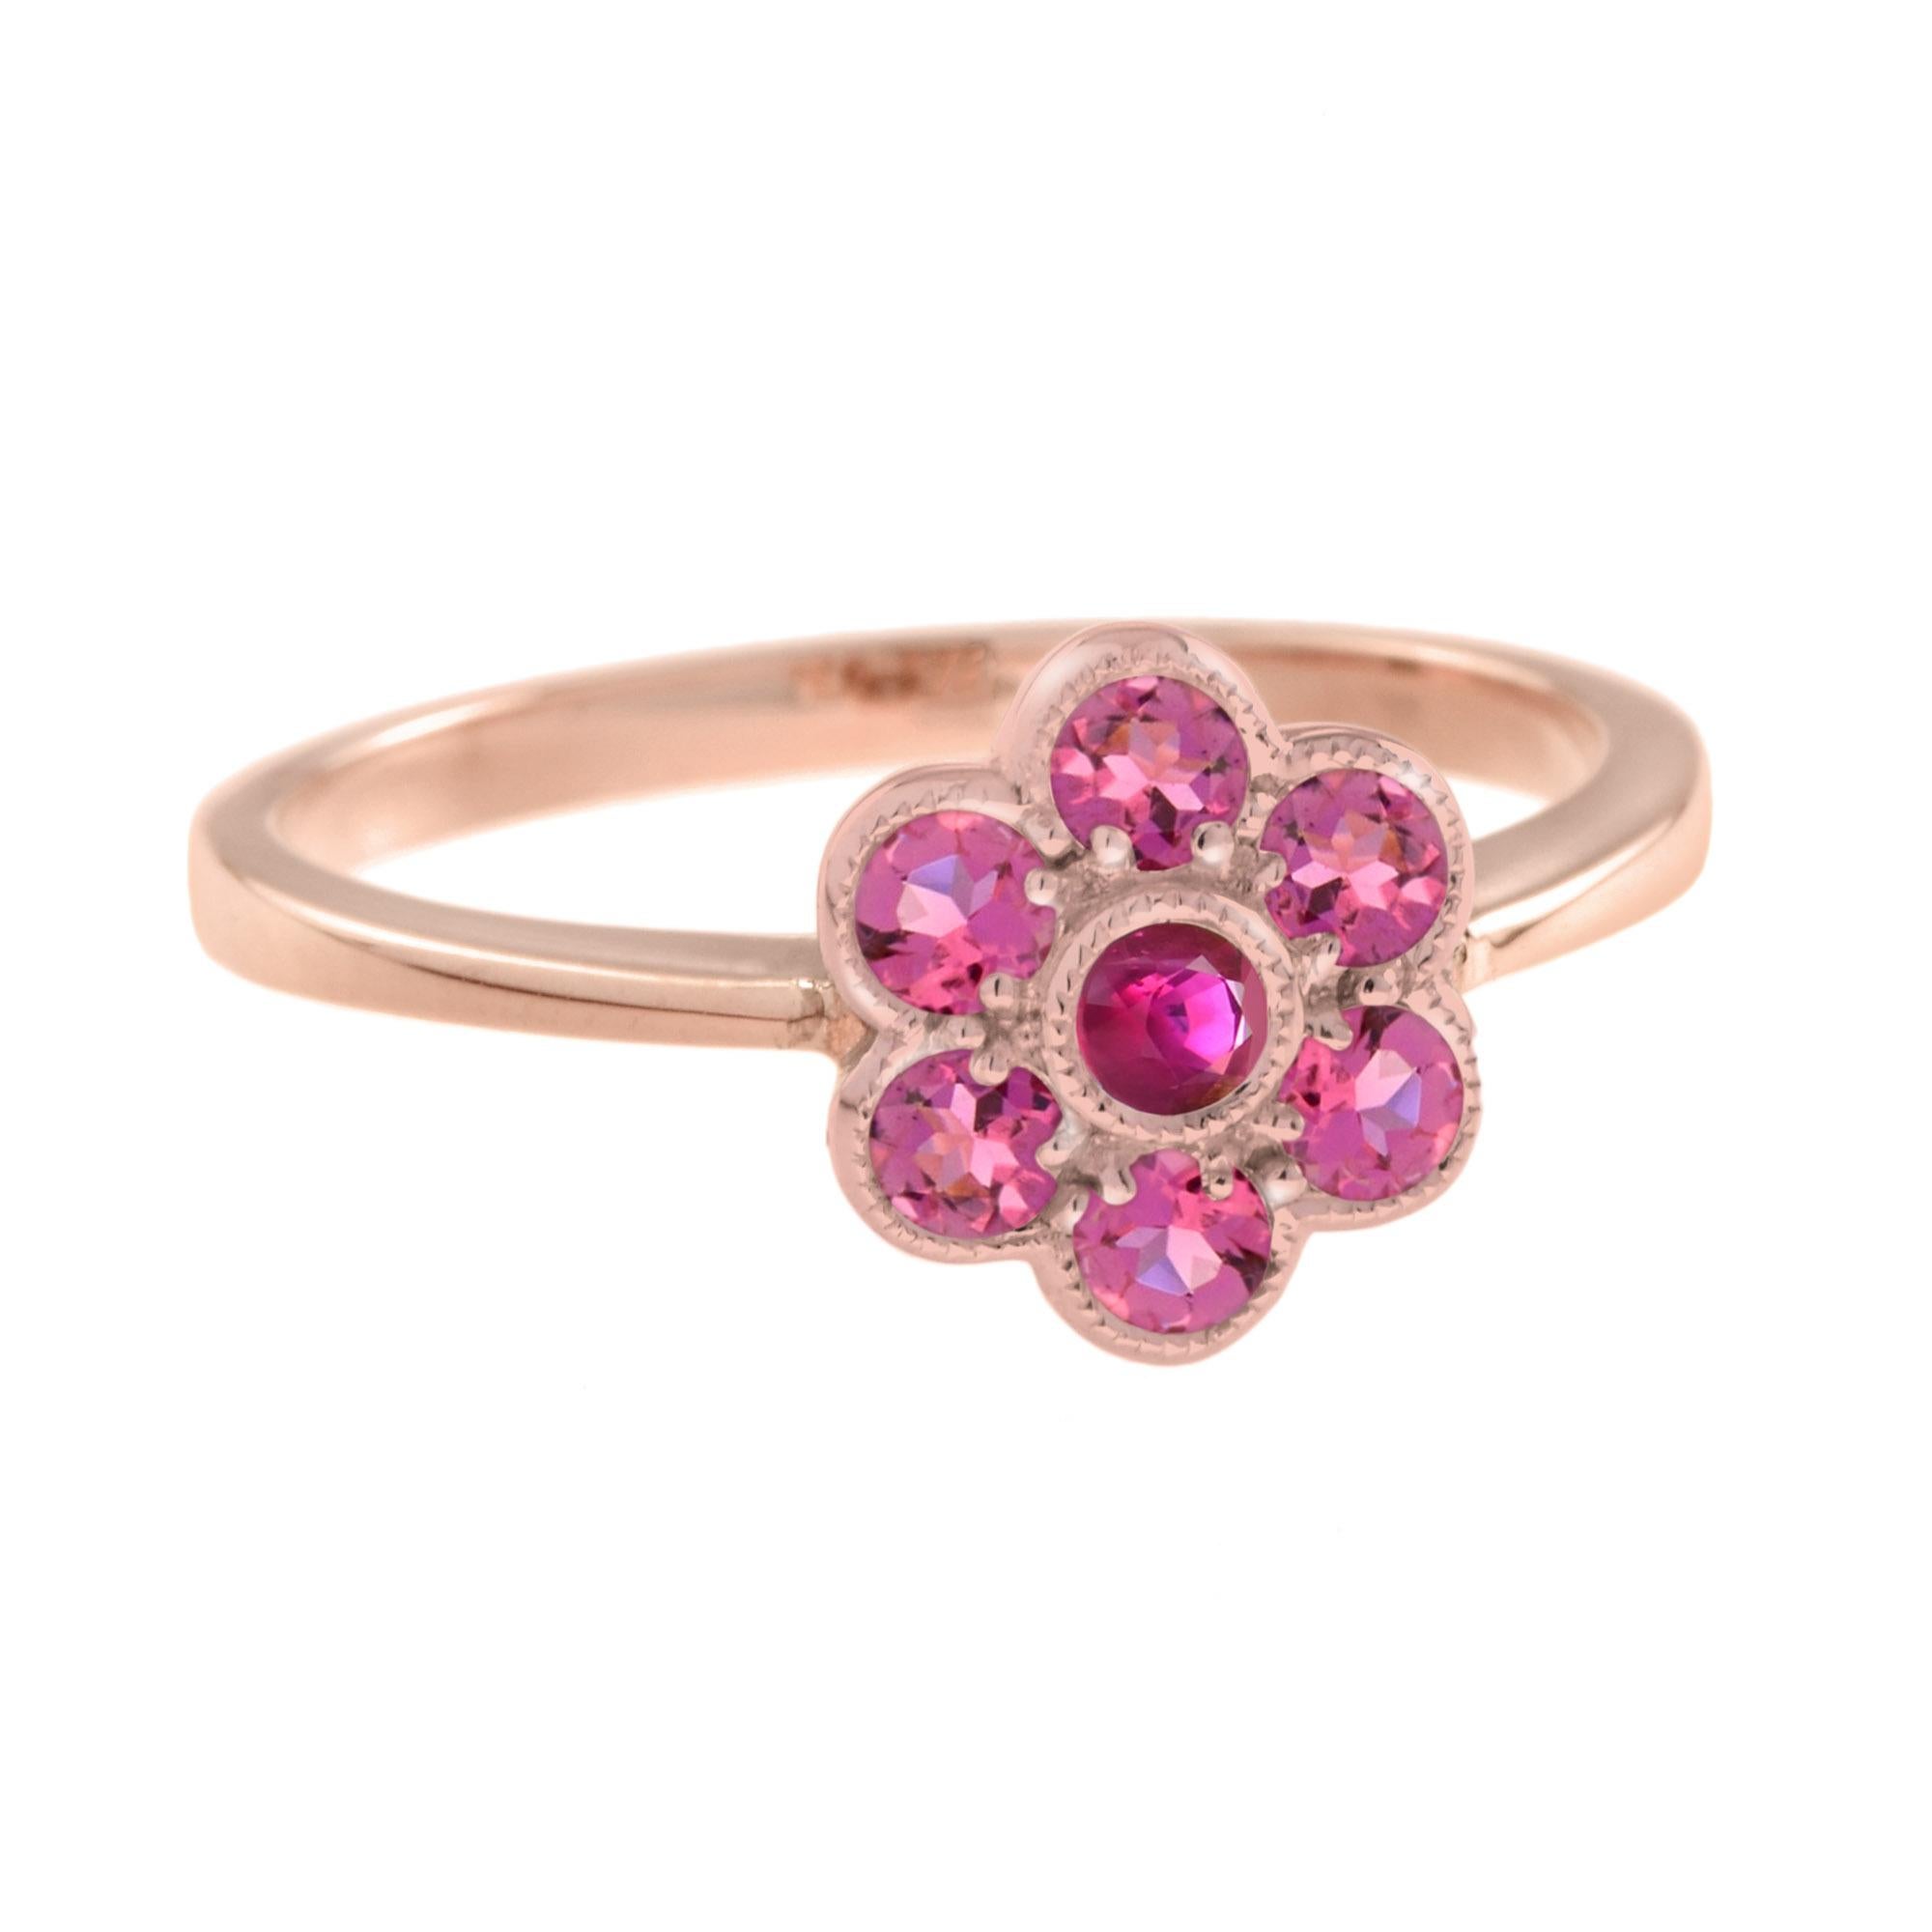 For Sale:  Ruby and Pink Tourmaline Floral Cluster Ring in 14K Rose Gold 4